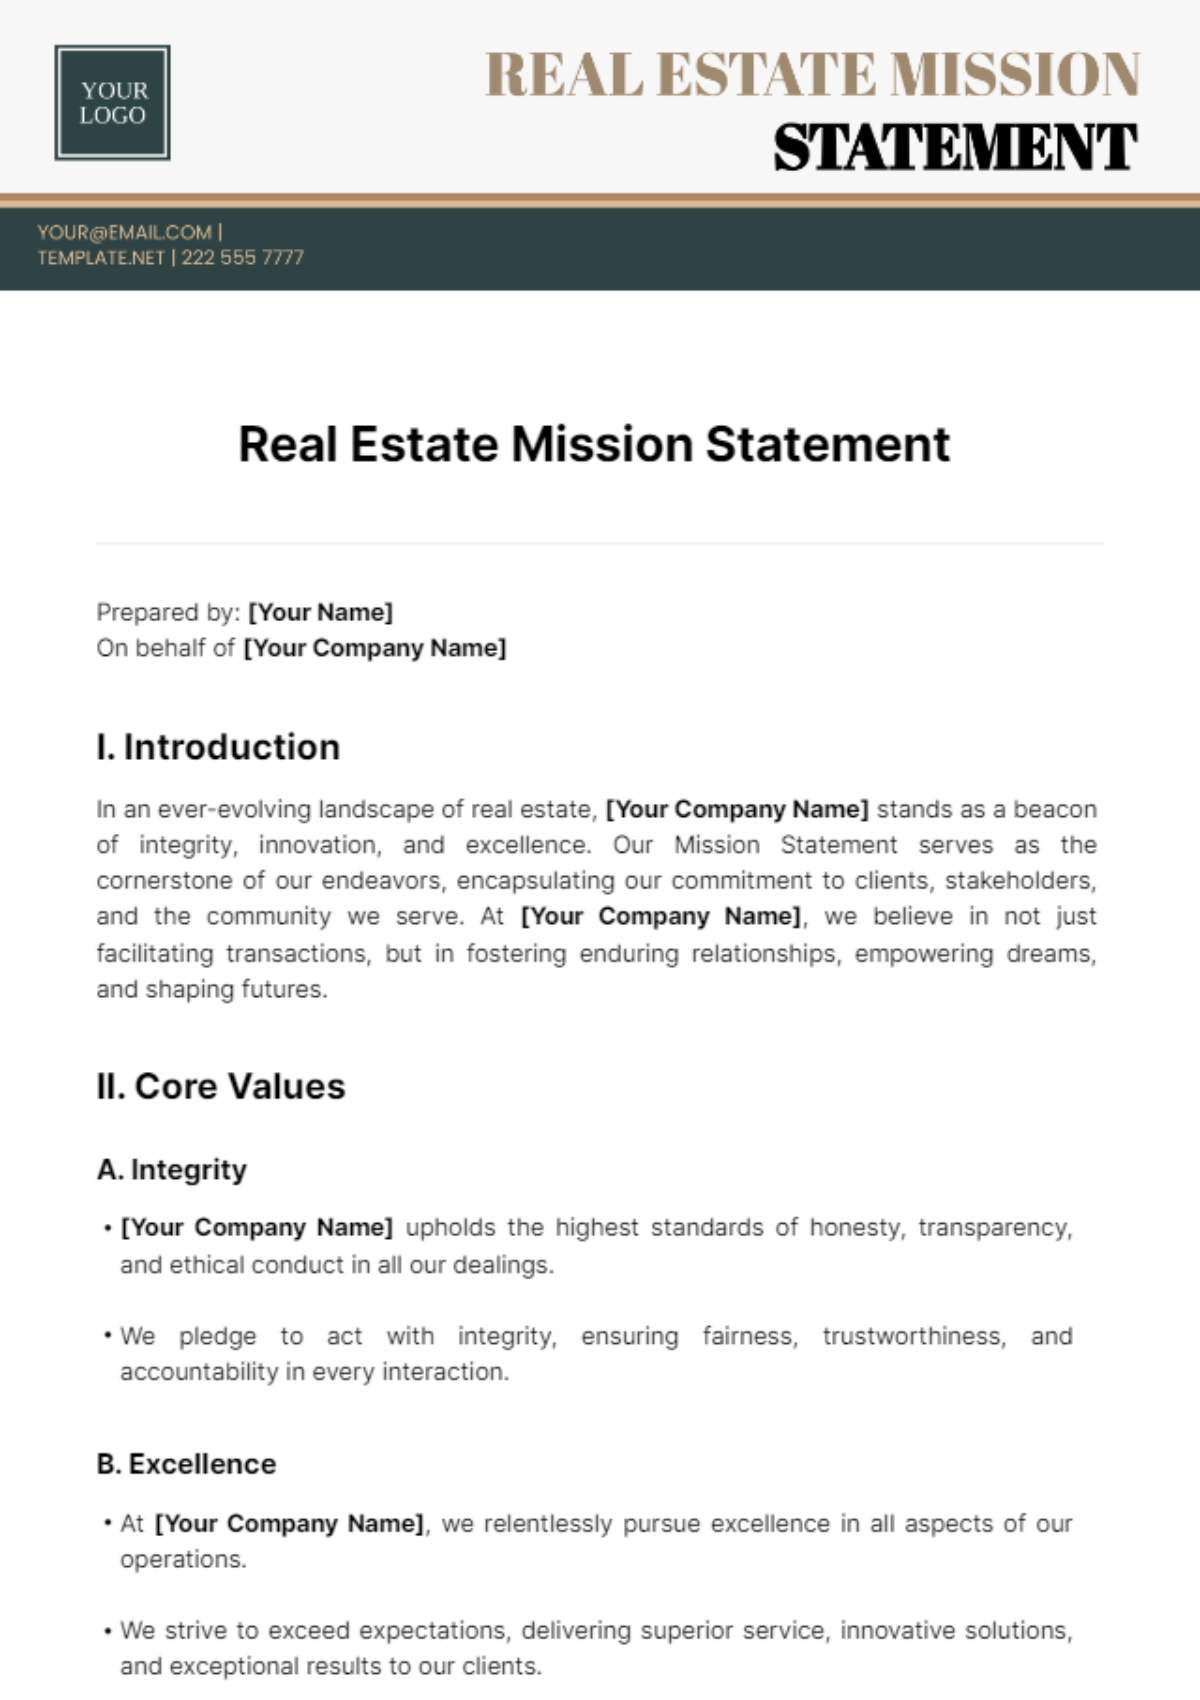 Real Estate Mission Statement Template